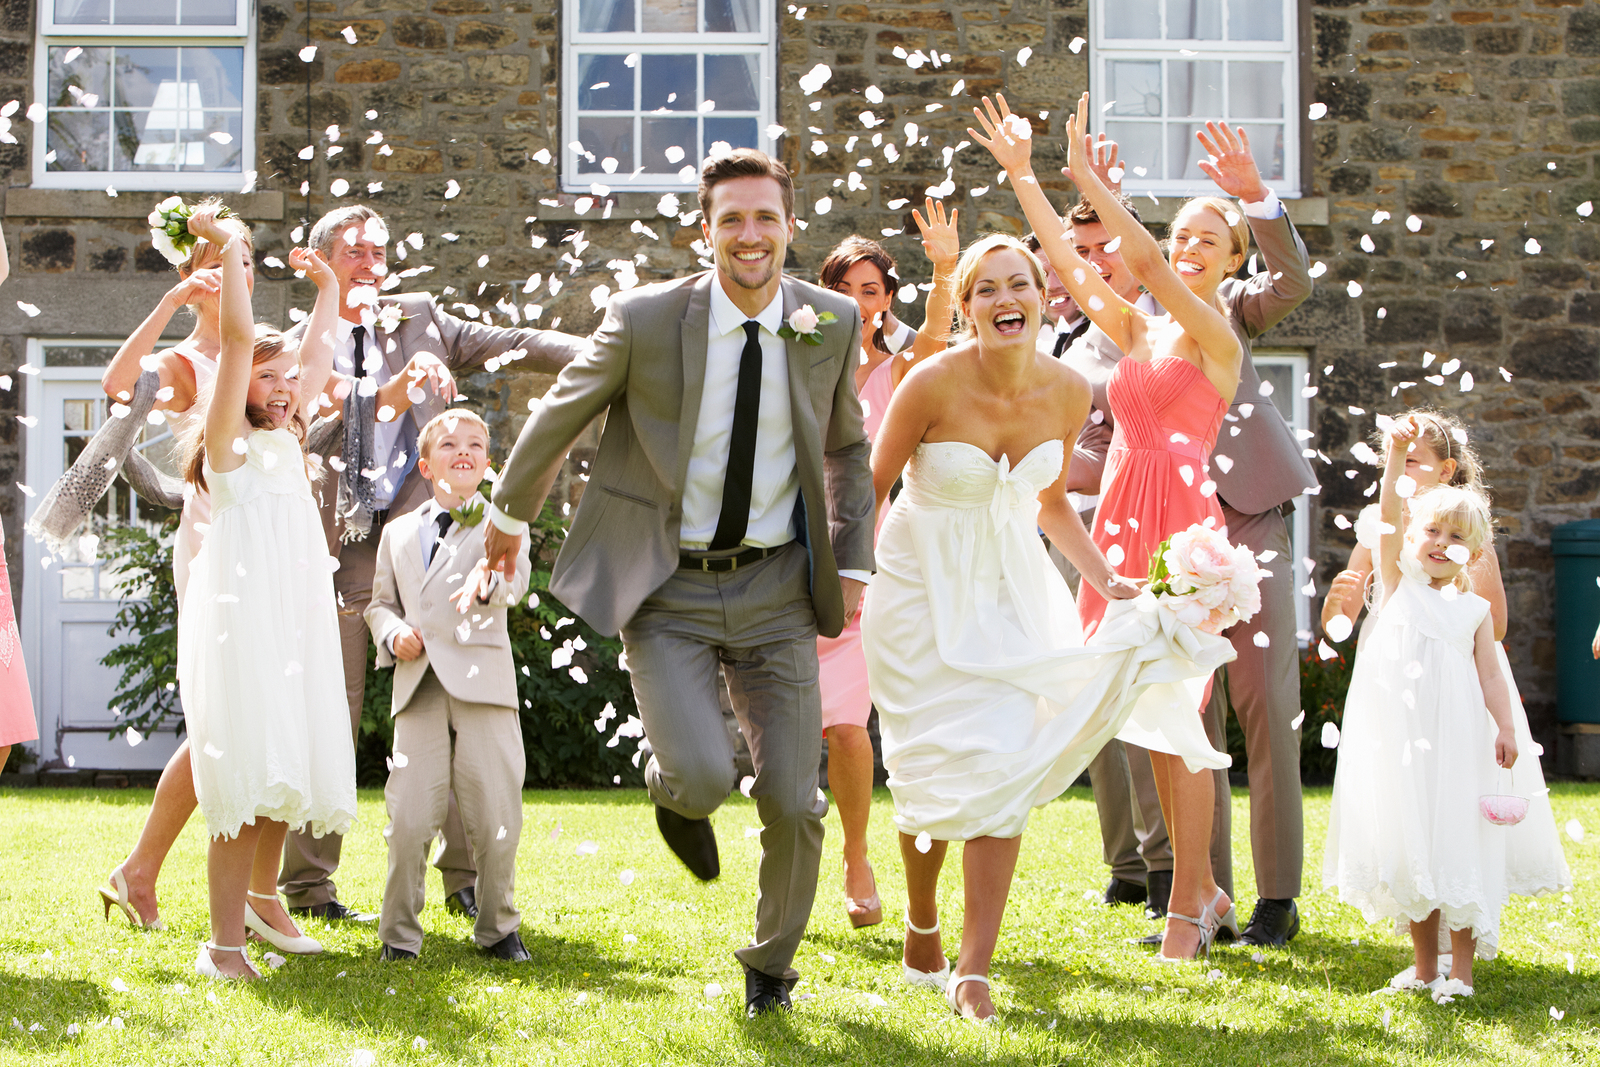 5 WAYS TO MAKE YOUR WEDDING DAY LAST FOREVER